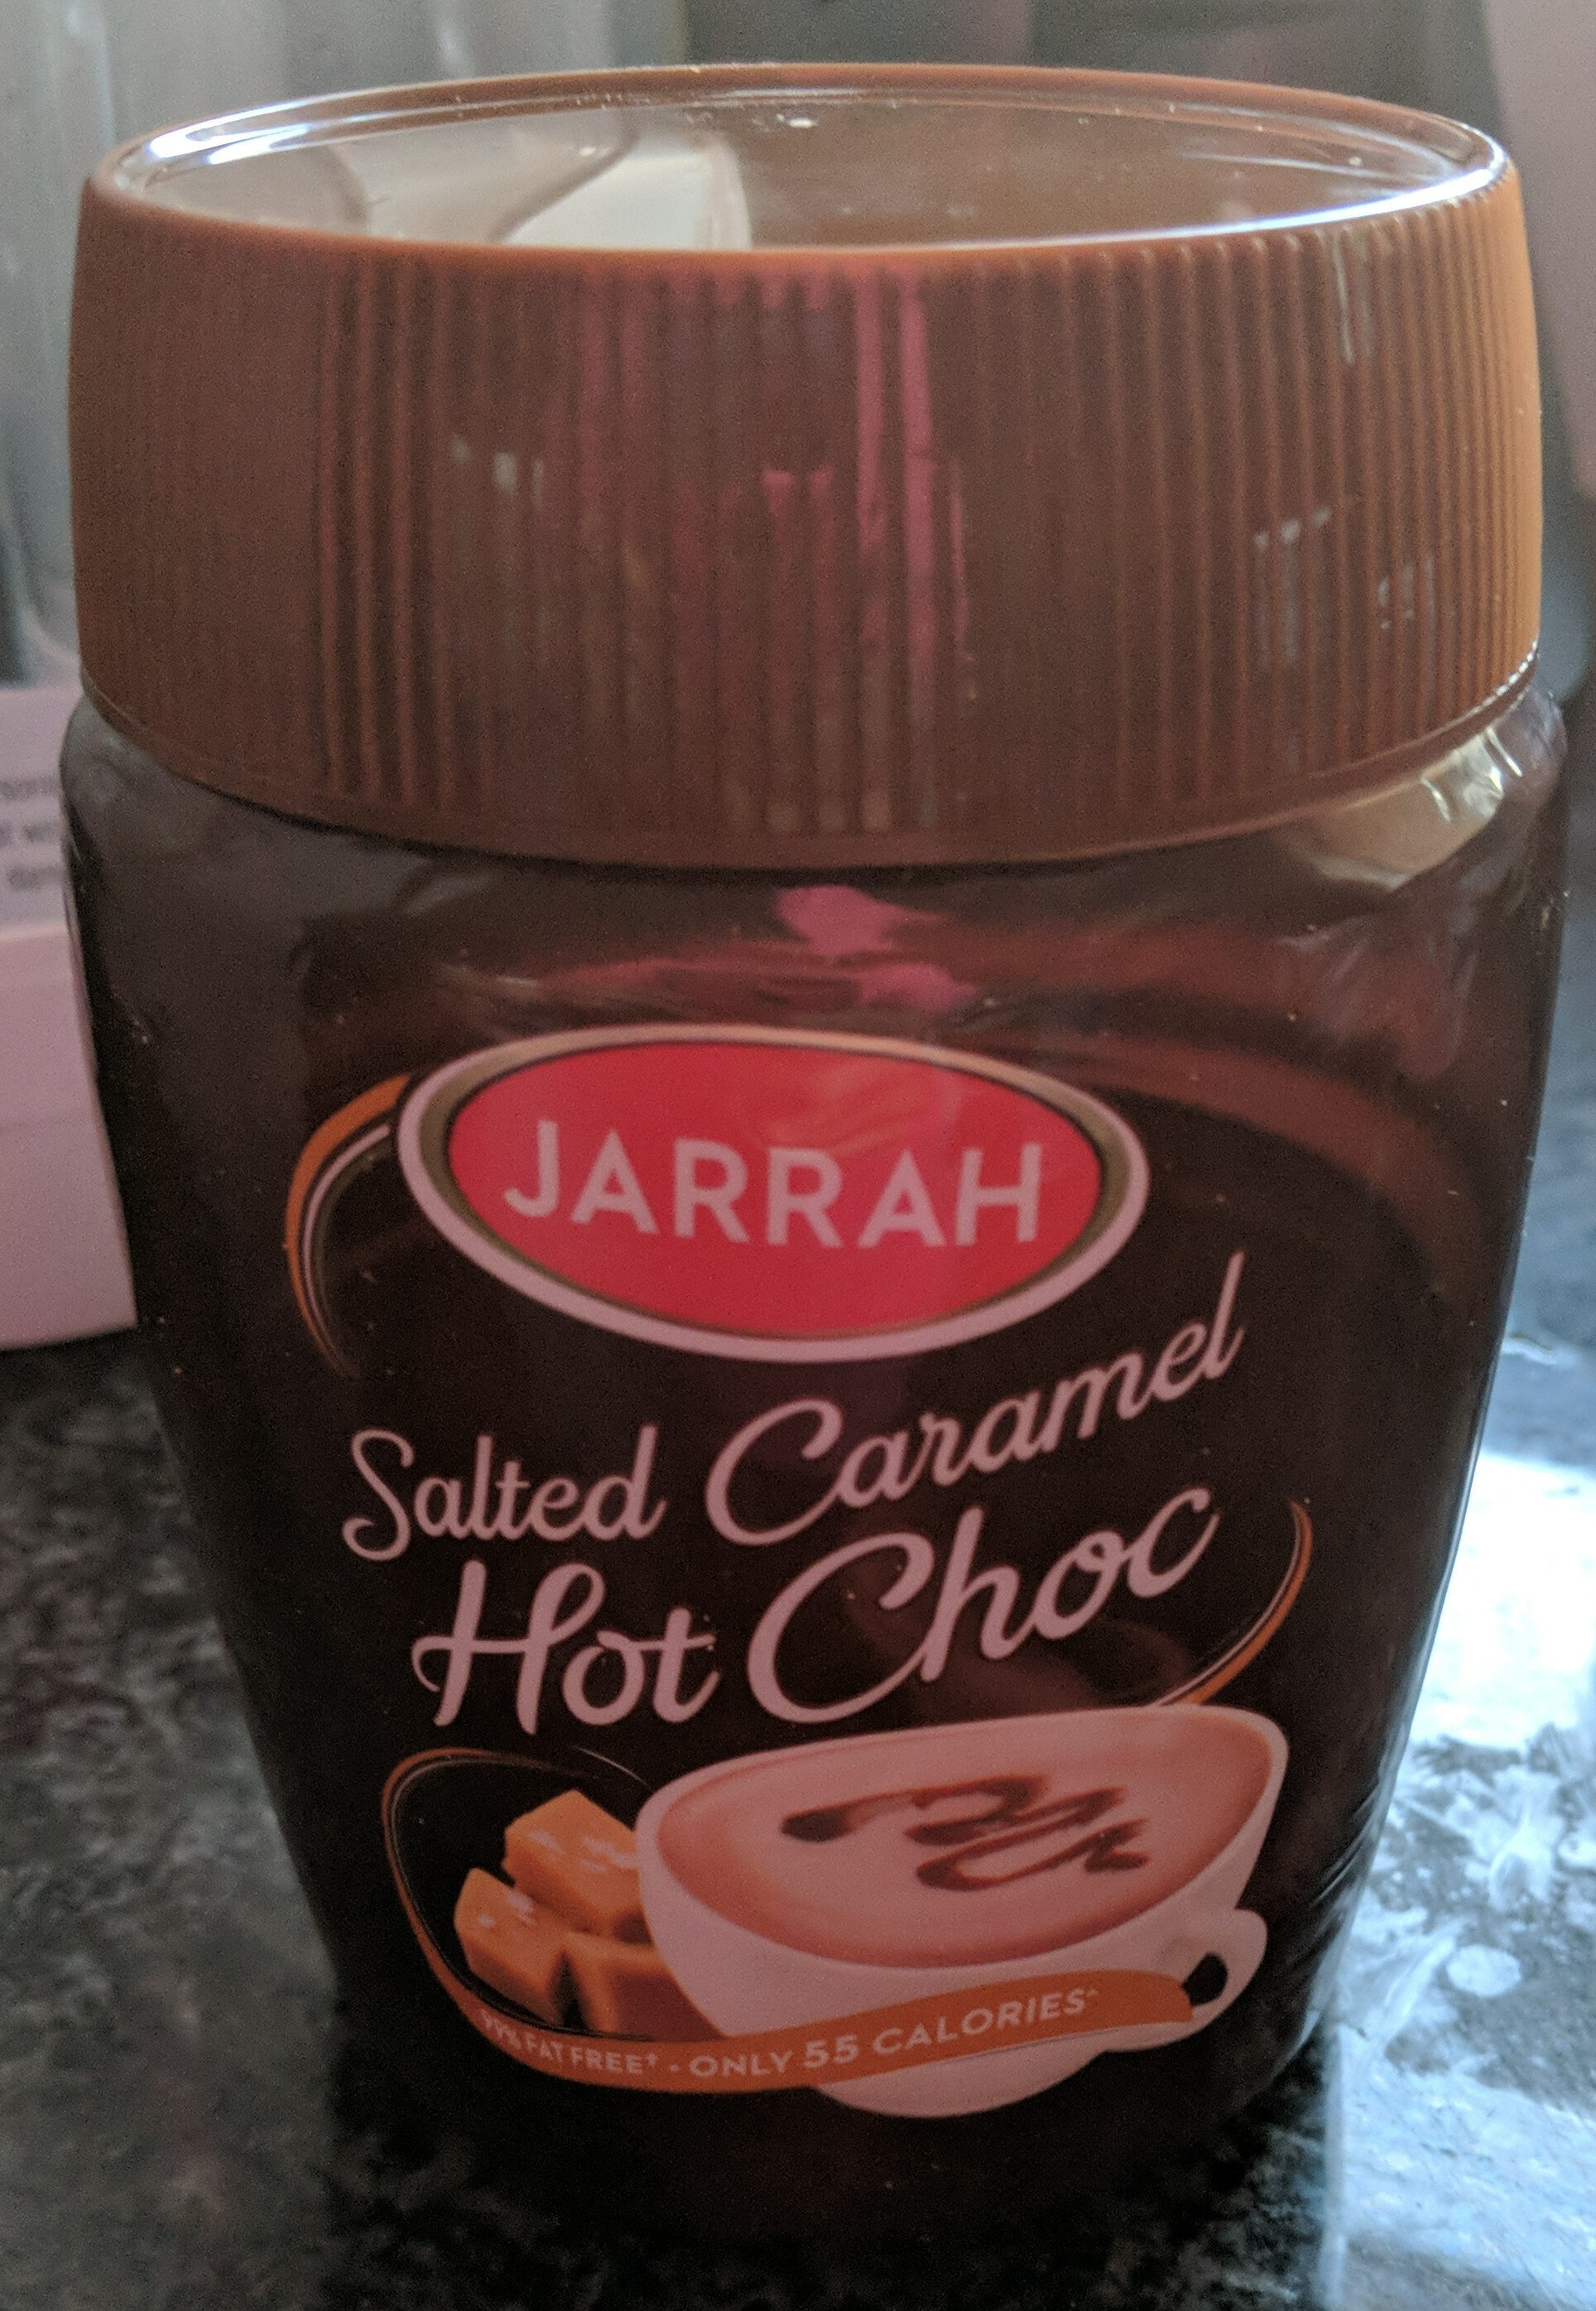 Salted Caramel Hot Chocolate - Product